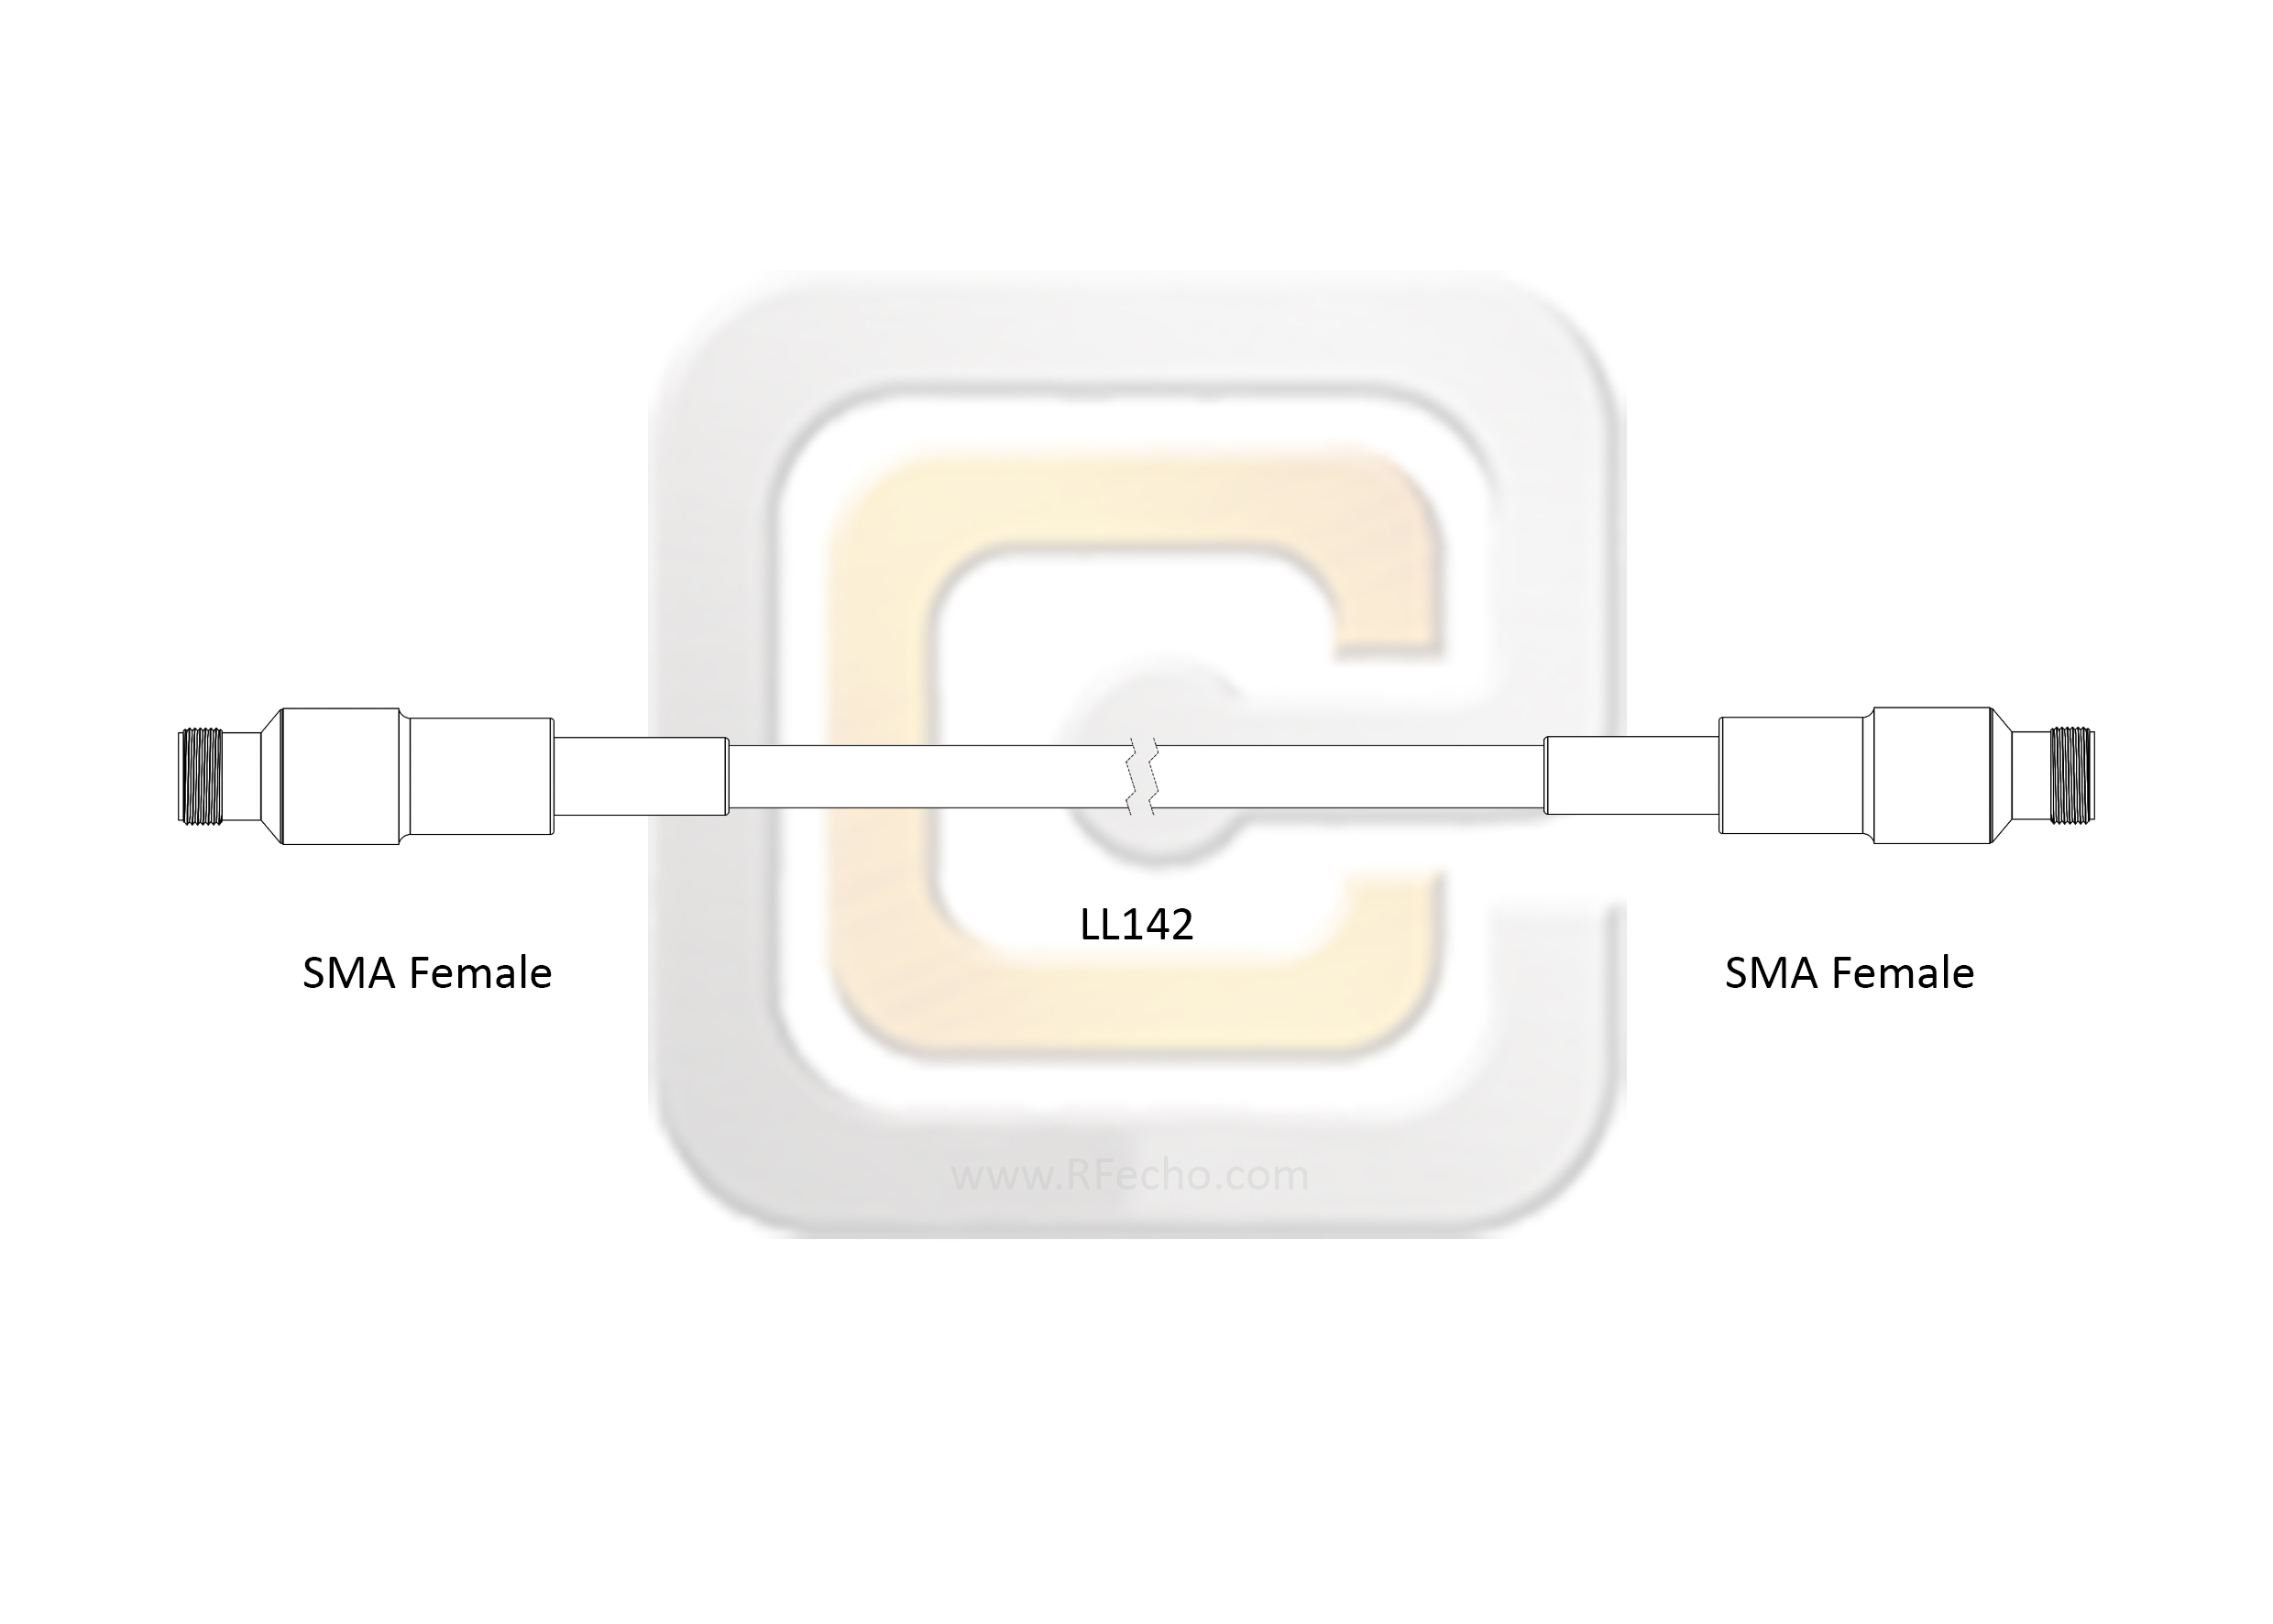 Low Loss SMA Female to SMA Female, 26.5 GHz,  LL142 Coax and RoHS